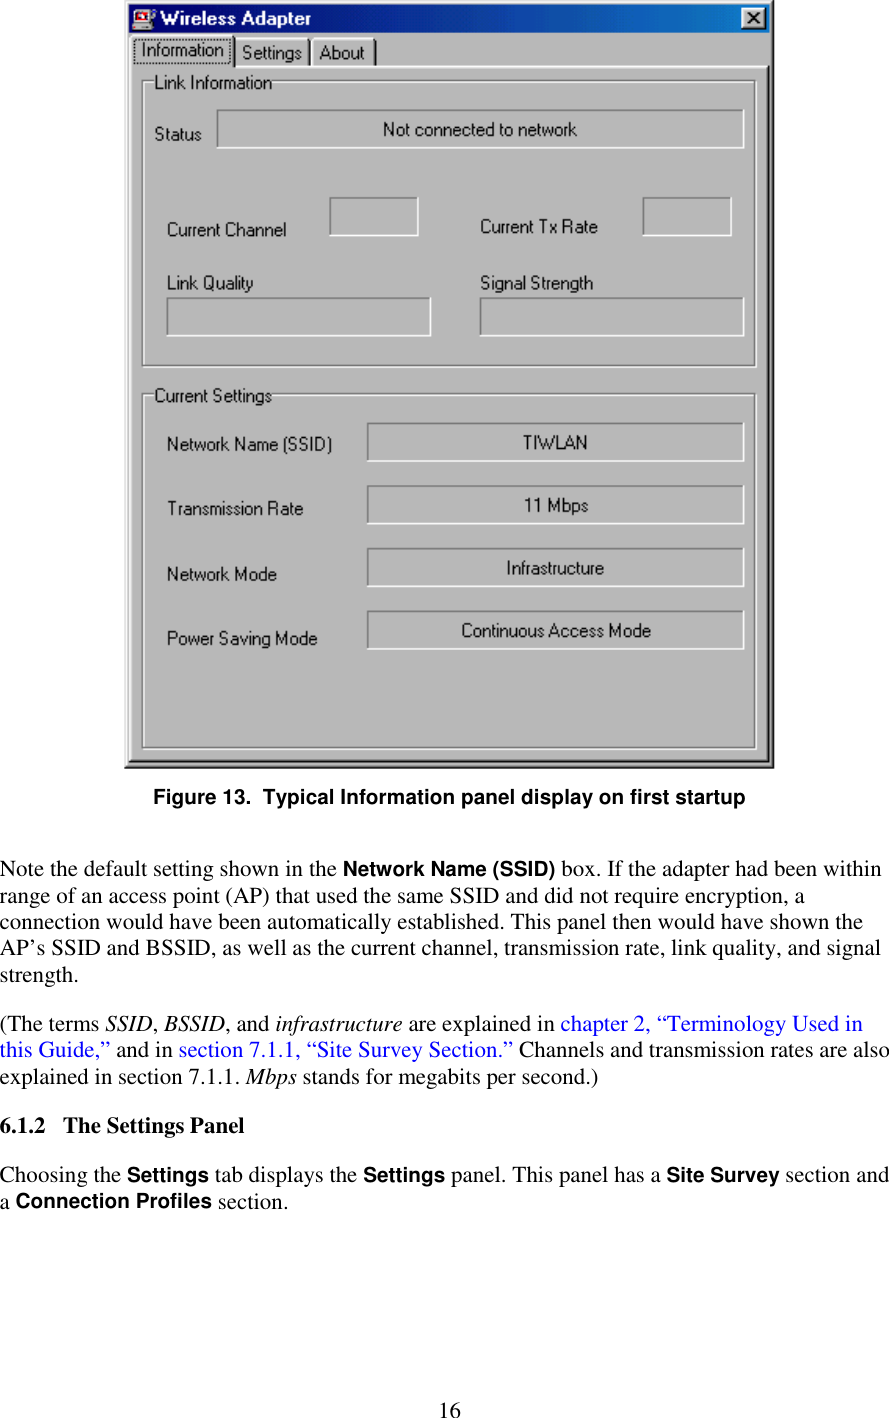   16  Figure 13.  Typical Information panel display on first startup Note the default setting shown in the Network Name (SSID) box. If the adapter had been within range of an access point (AP) that used the same SSID and did not require encryption, a connection would have been automatically established. This panel then would have shown the AP’s SSID and BSSID, as well as the current channel, transmission rate, link quality, and signal strength. (The terms SSID, BSSID, and infrastructure are explained in chapter 2, “Terminology Used in this Guide,” and in section 7.1.1, “Site Survey Section.” Channels and transmission rates are also explained in section 7.1.1. Mbps stands for megabits per second.) 6.1.2   The Settings Panel Choosing the Settings tab displays the Settings panel. This panel has a Site Survey section and a Connection Profiles section. 